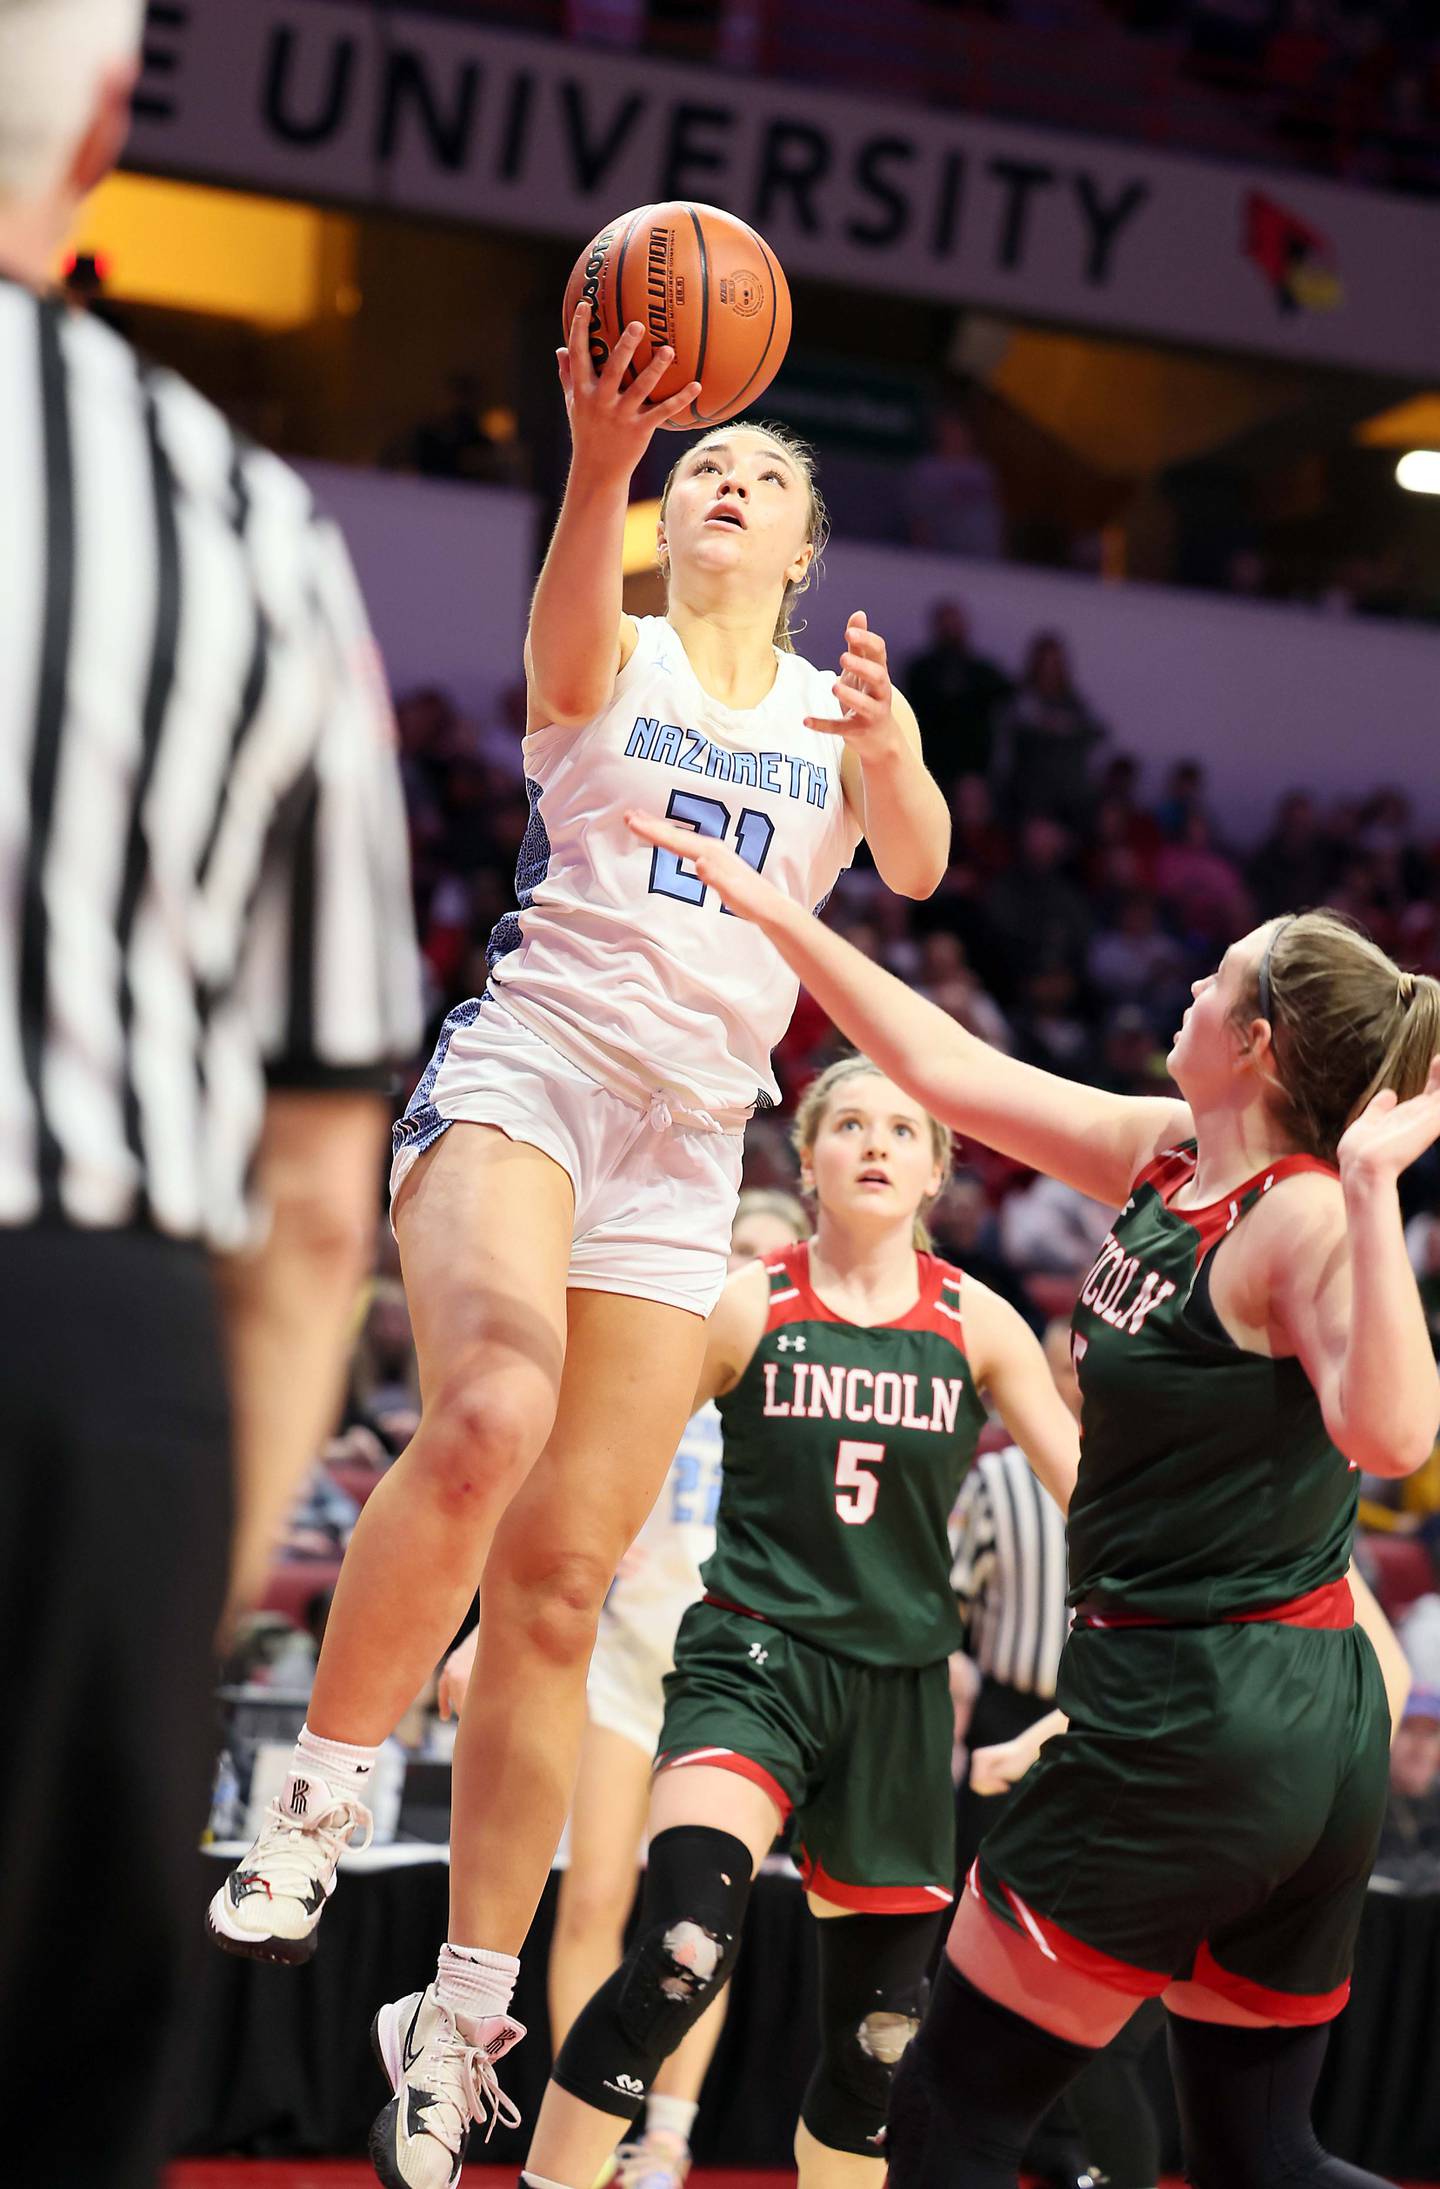 Nazareth Academy's Olivia Austin (21) drives to the hoop during the IHSA Class 3A girls basketball championship game at the CEFCU Arena on the campus of Illinois State University Saturday March 4, 2023 in Normal.